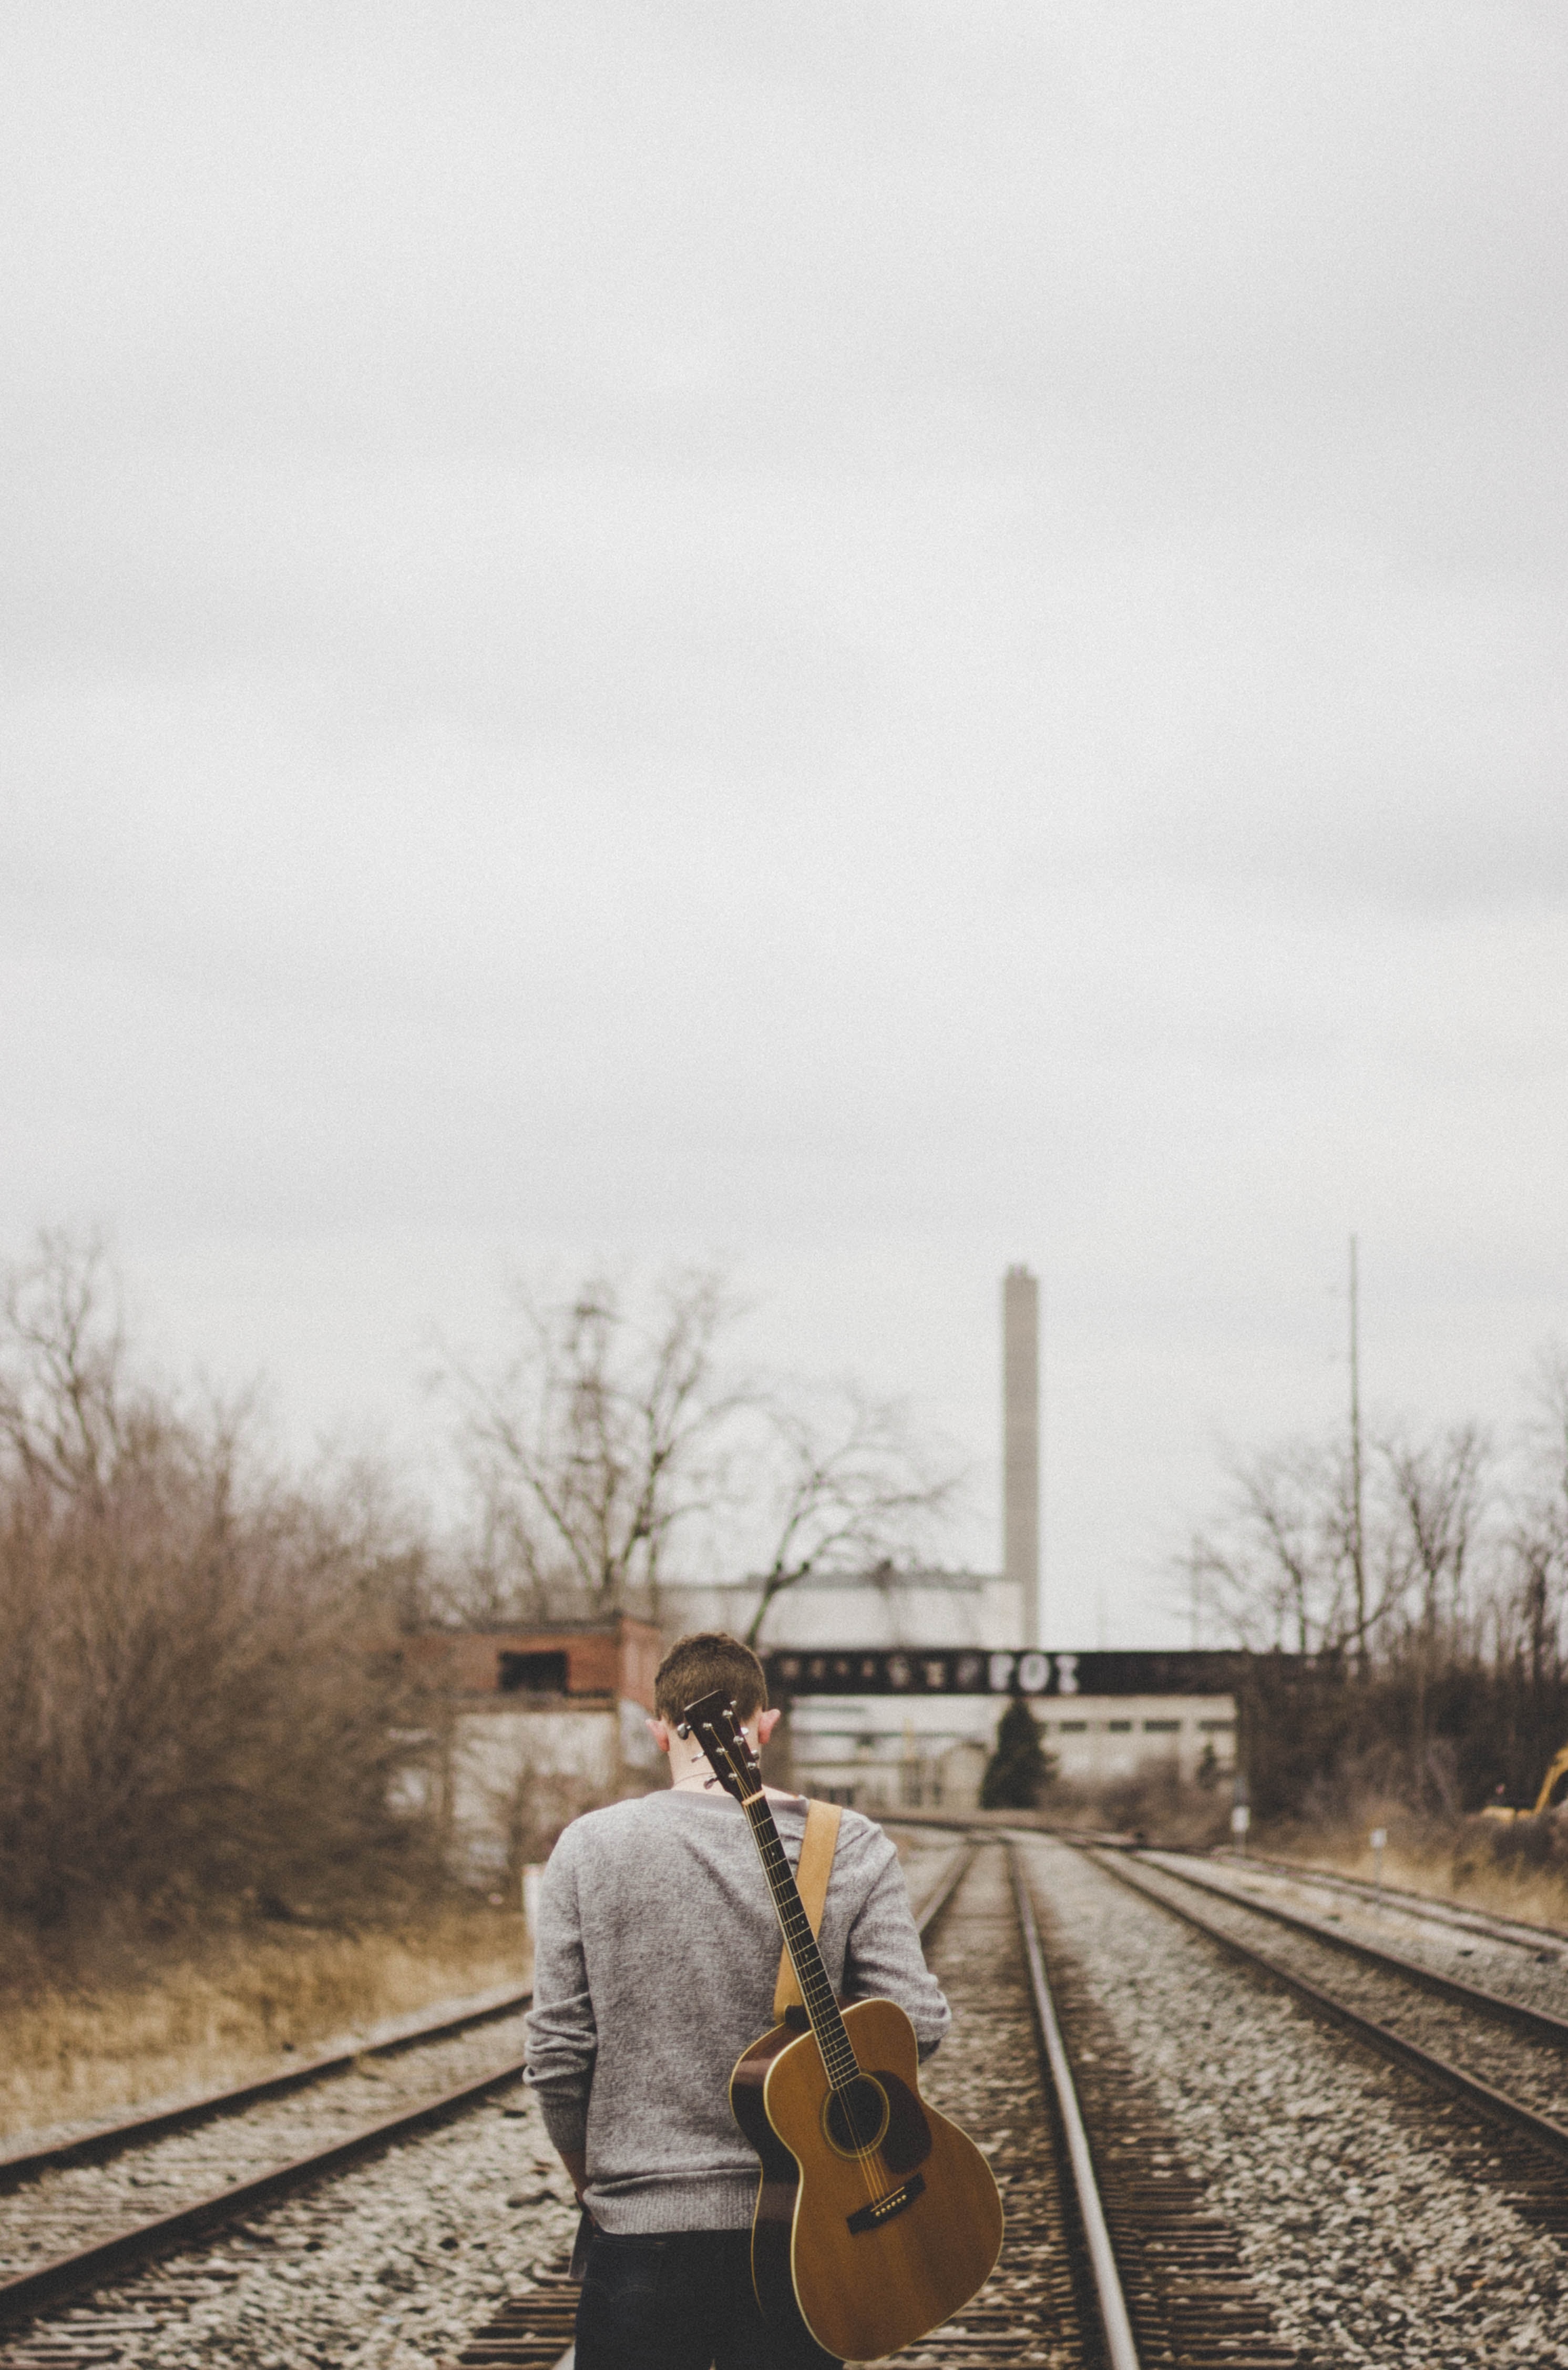 A man walking on a train track while carrying a guitar. │ Source: Pexels